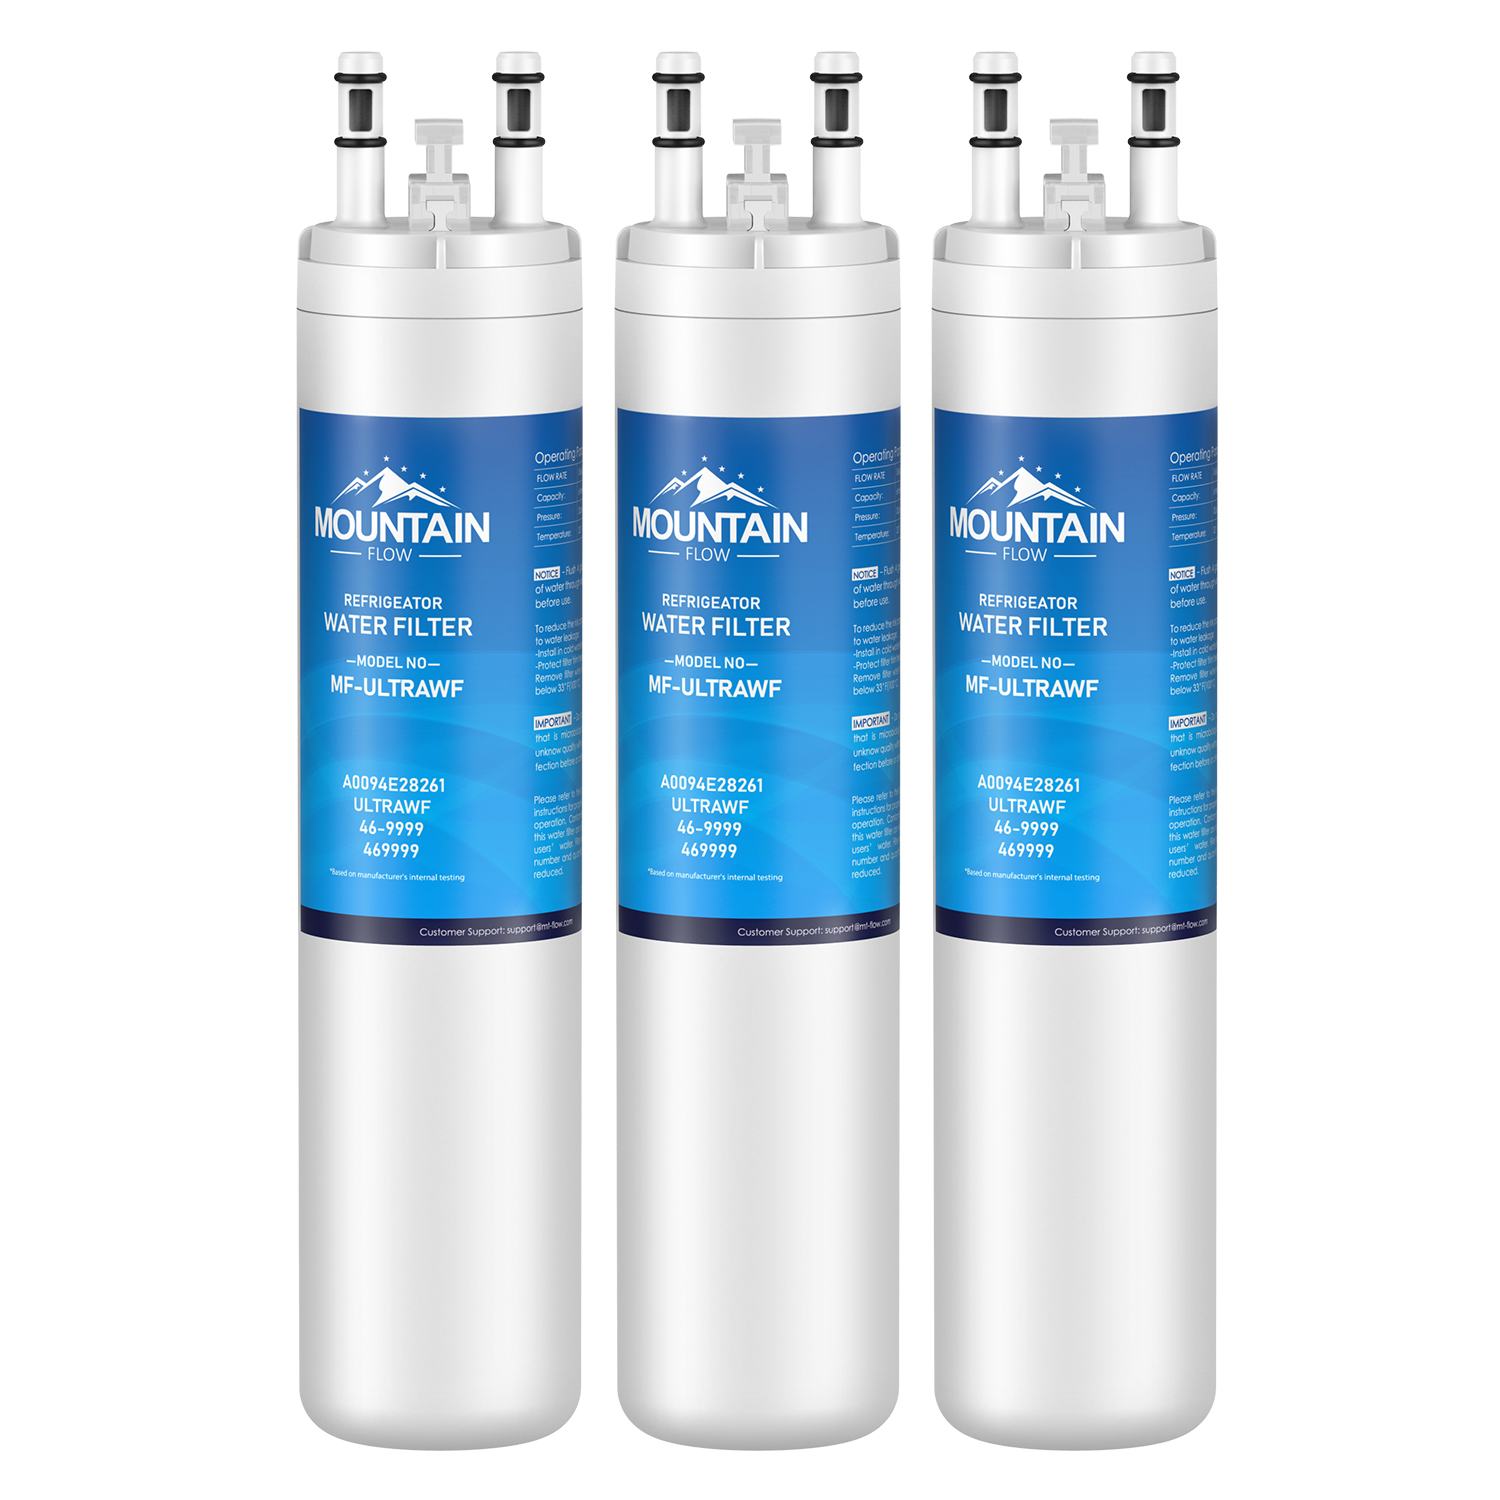 ULTRAWF PureSource Ultra Water Filter Compatible with 46-9999, 3Packs